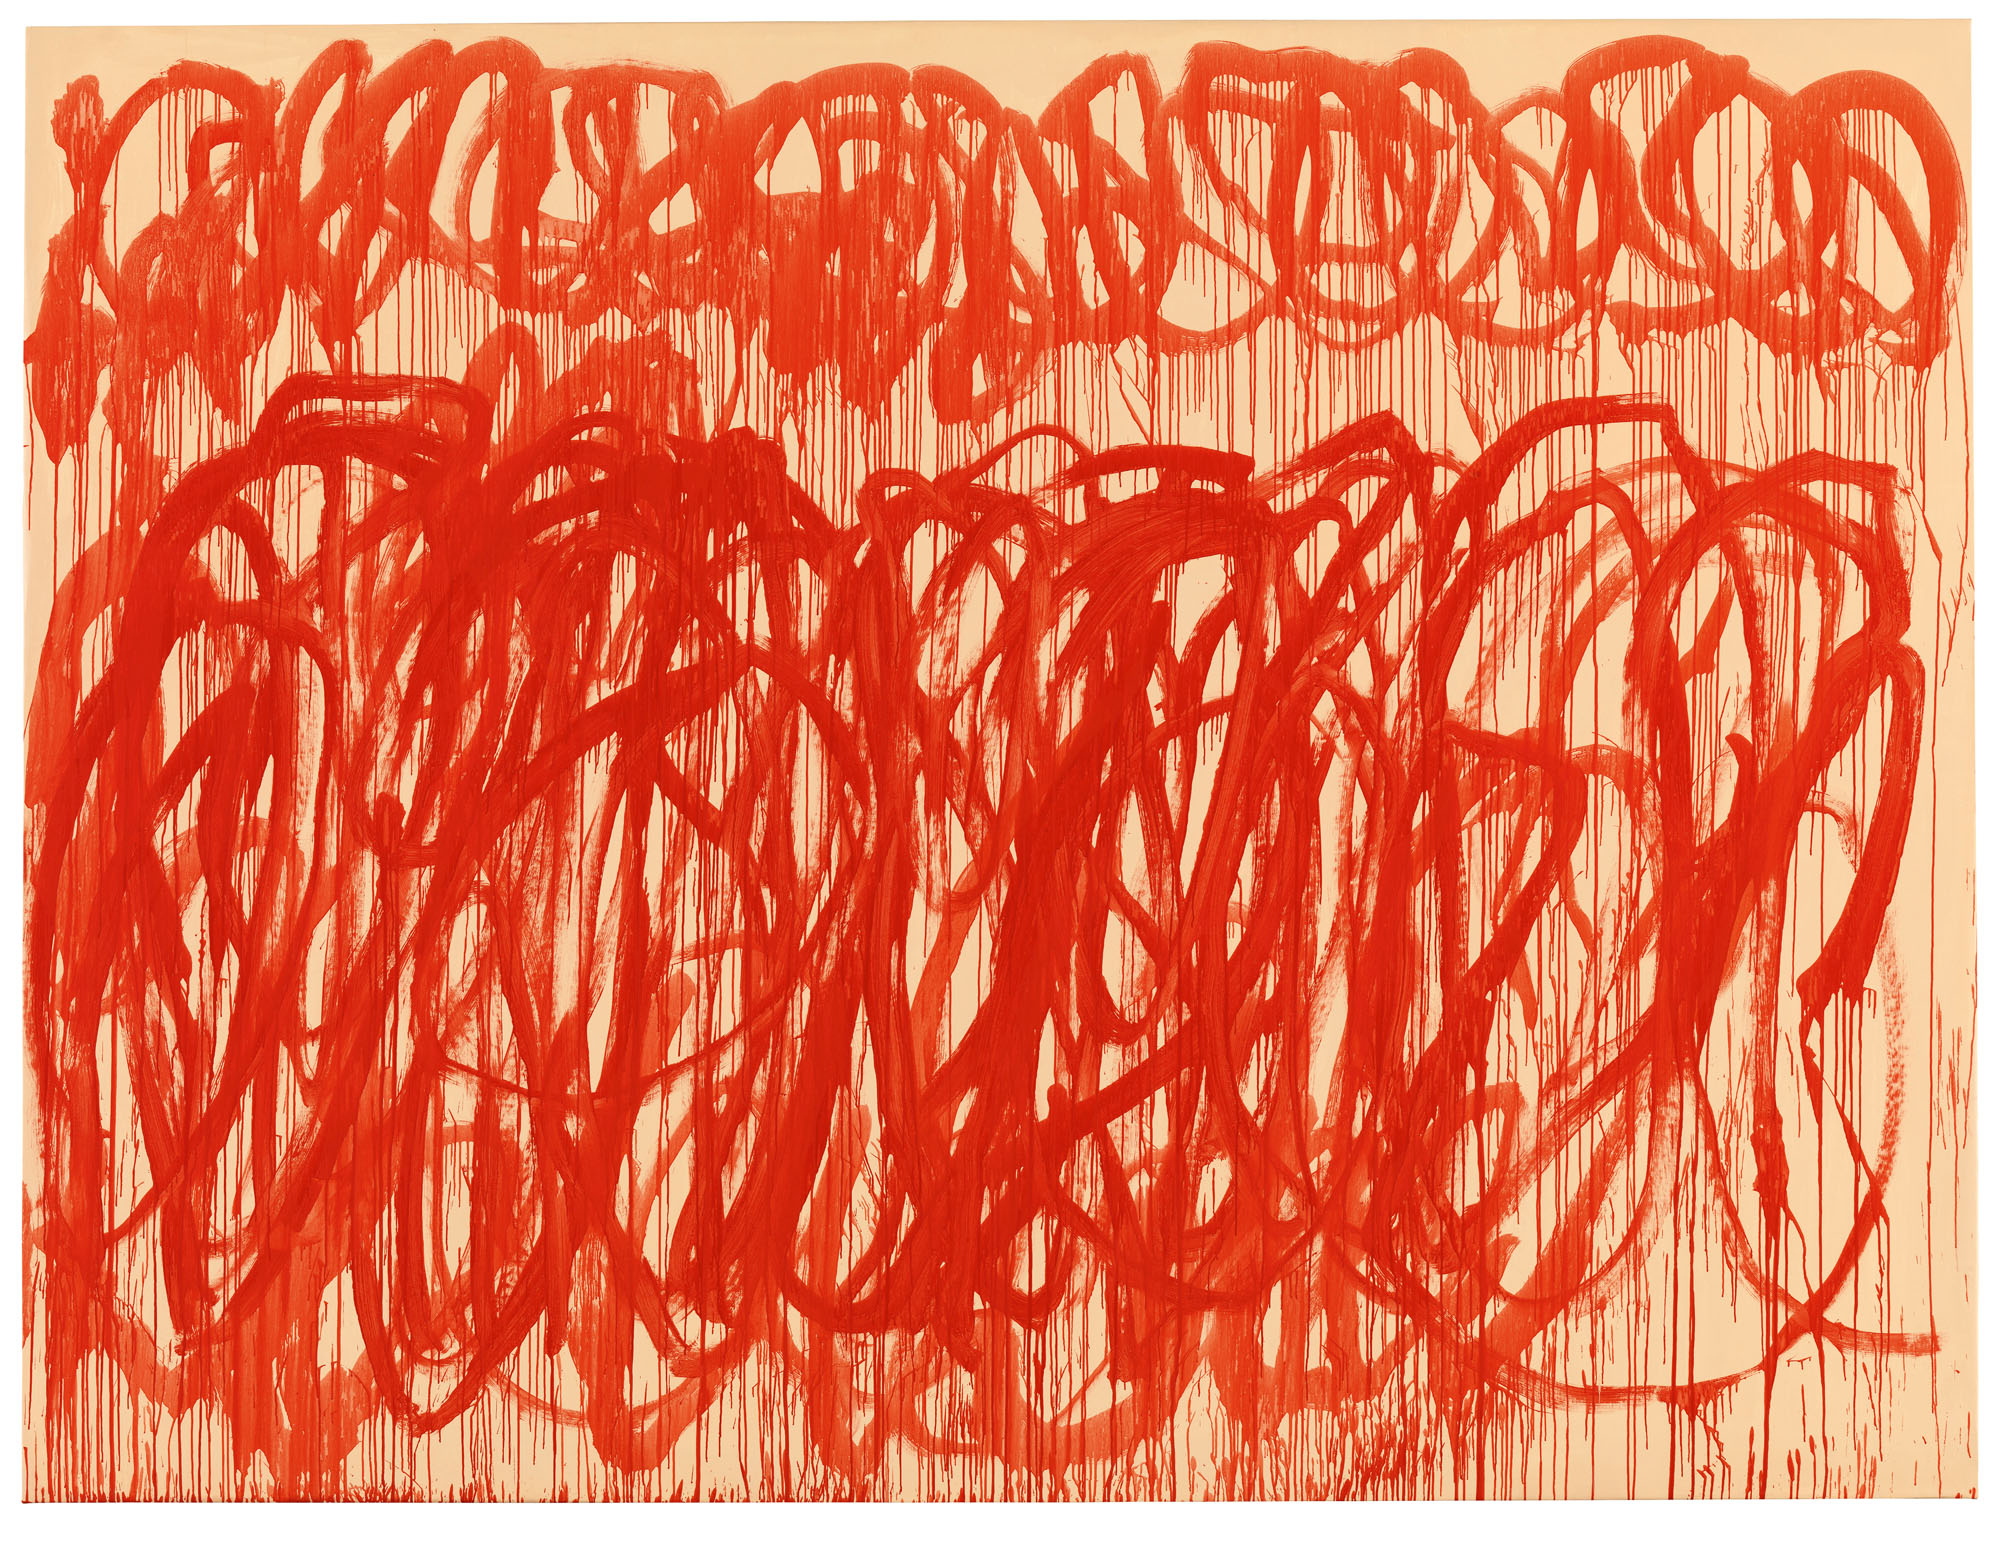 Cy Twombly (American, 1928-2011) 'Untitled (Bacchus)' 2005